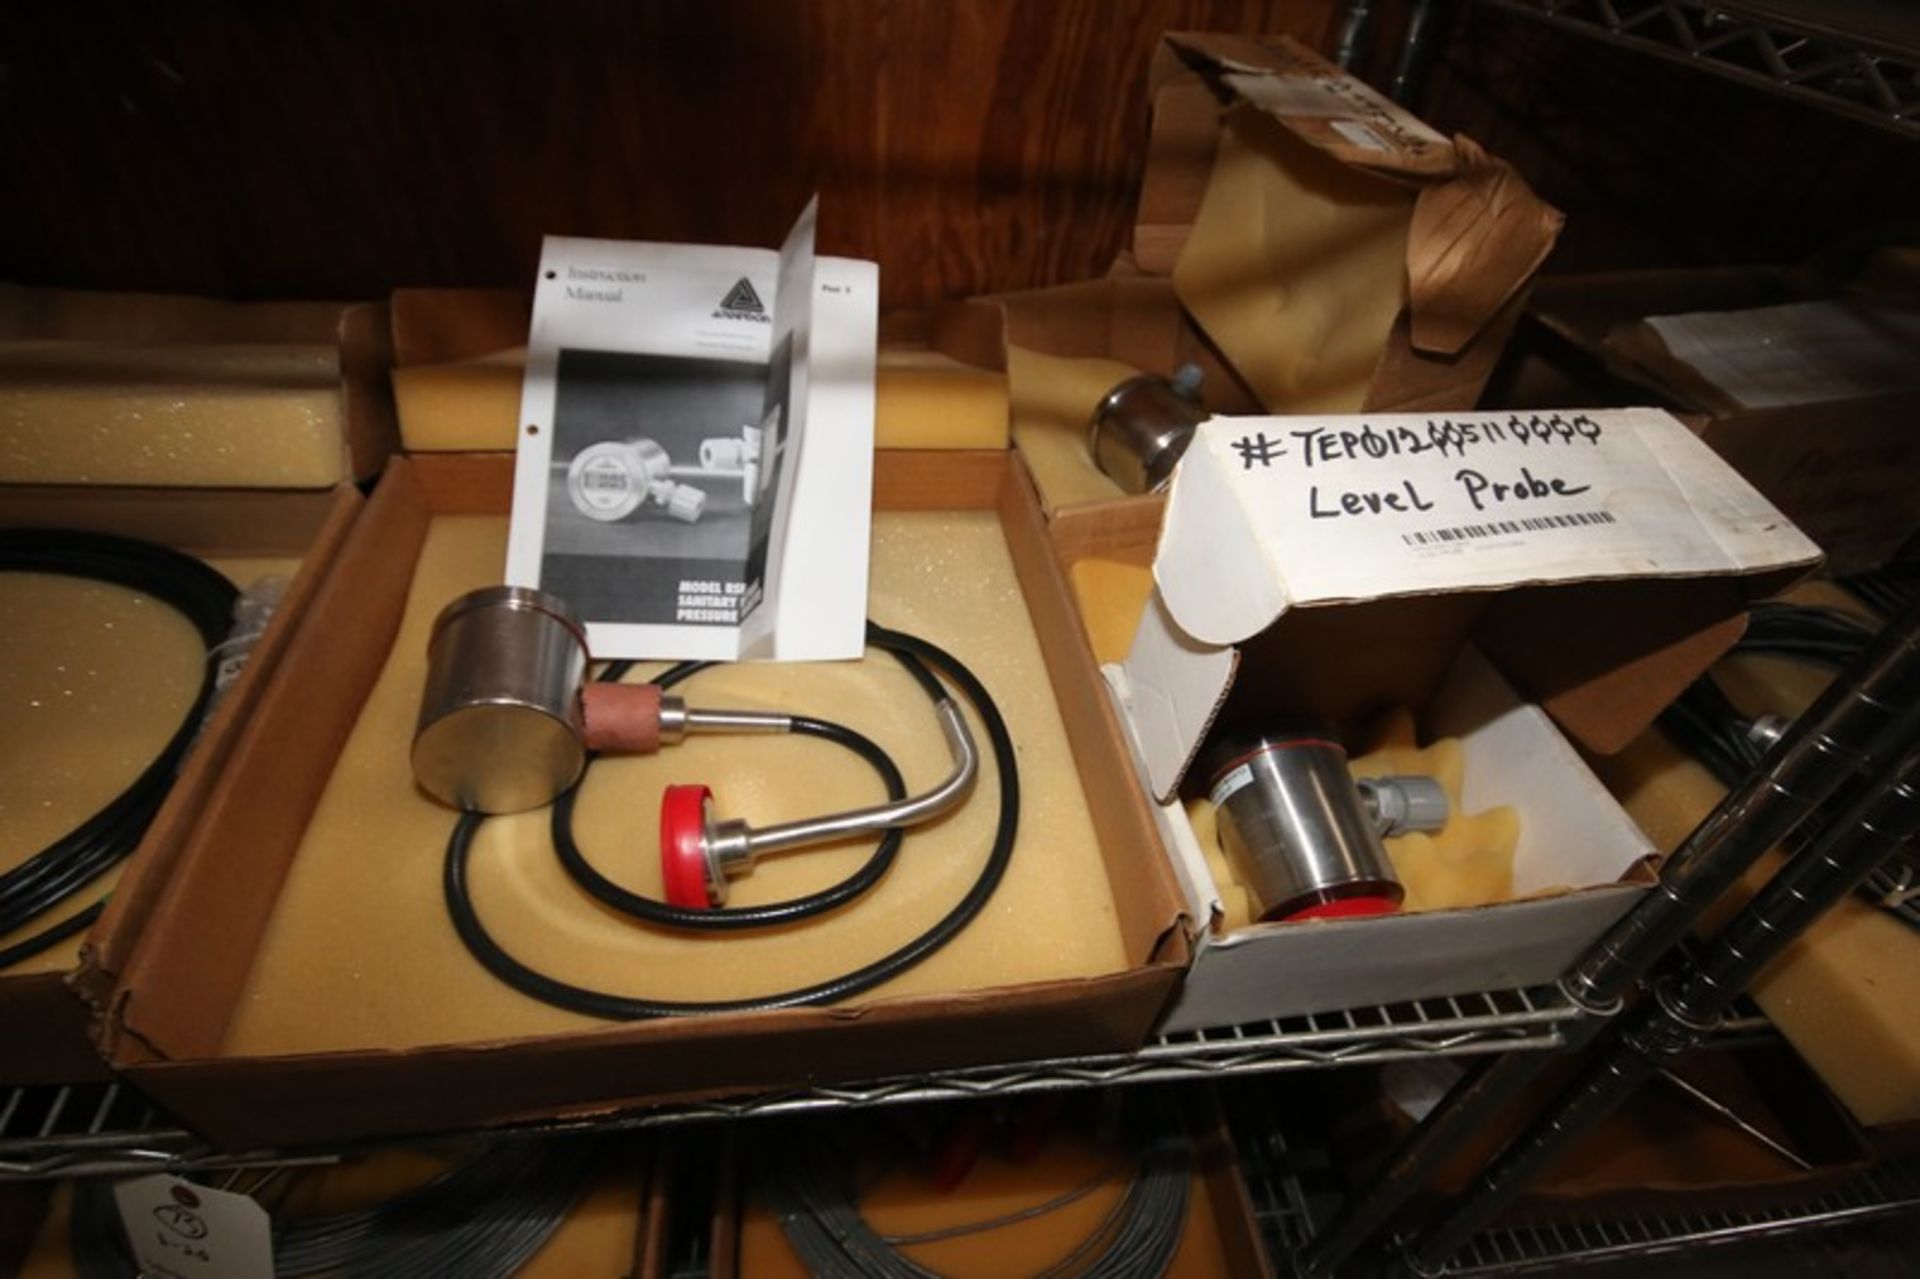 Lot of (11) Assorted Anderson Level Probes, Pressure Transducers & Transmitters, Temp. Probes, - Image 2 of 3